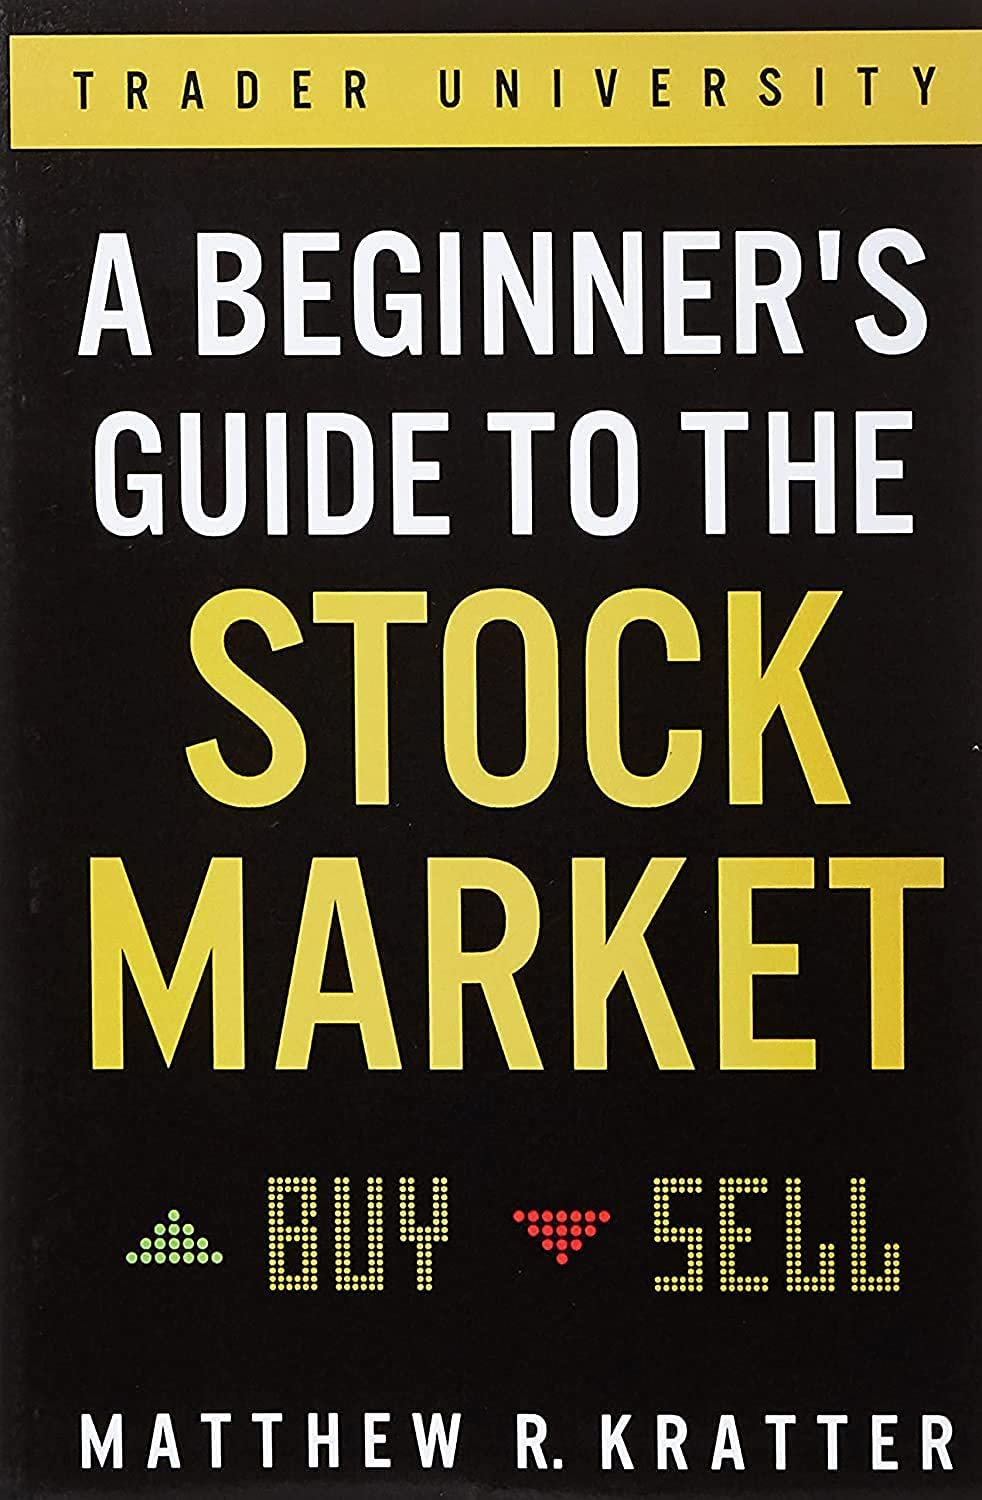 best trading books for beginners | A Beginner's Guide to the Stock Market, by Matthew R. Kratter